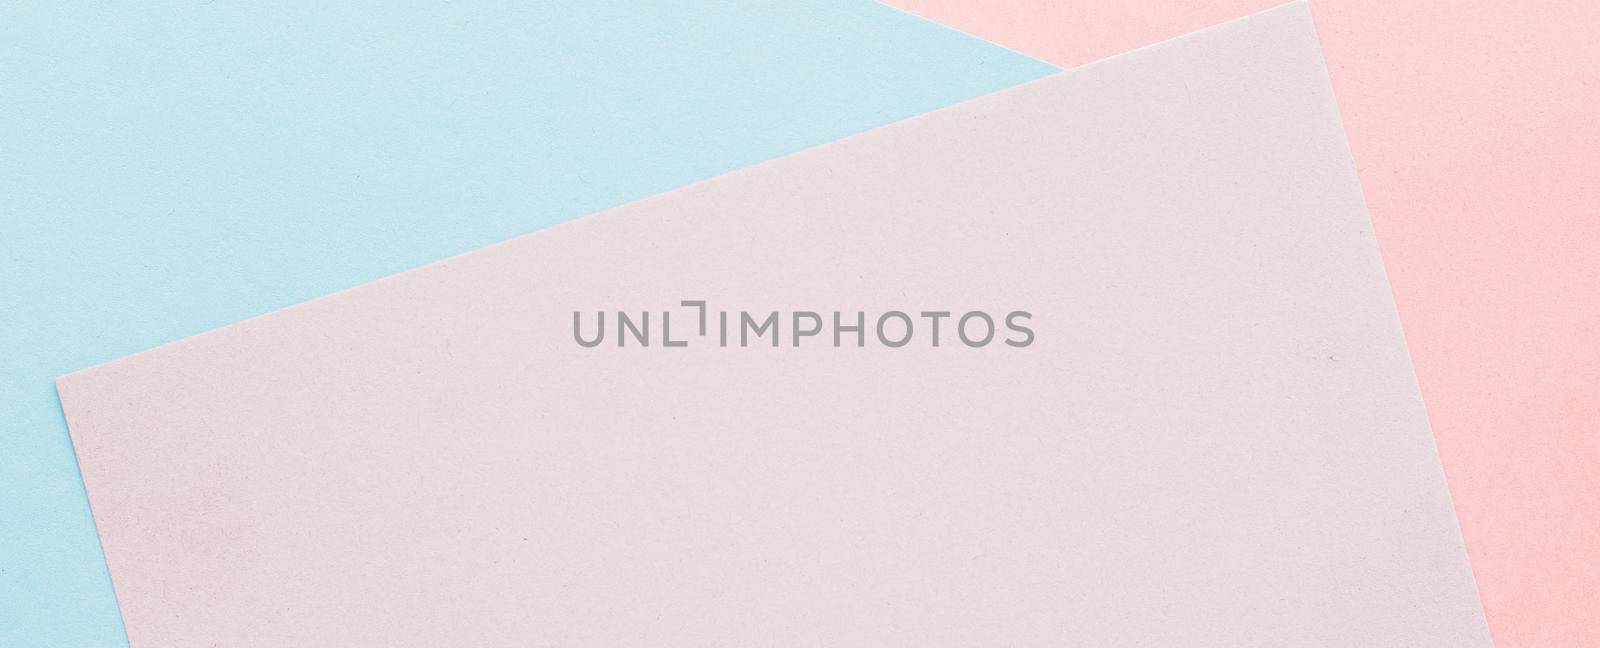 Abstract blank paper texture background, stationery mockup flatlay backdrop, brand identity design mock up for holiday branding template and notepaper layout by Anneleven